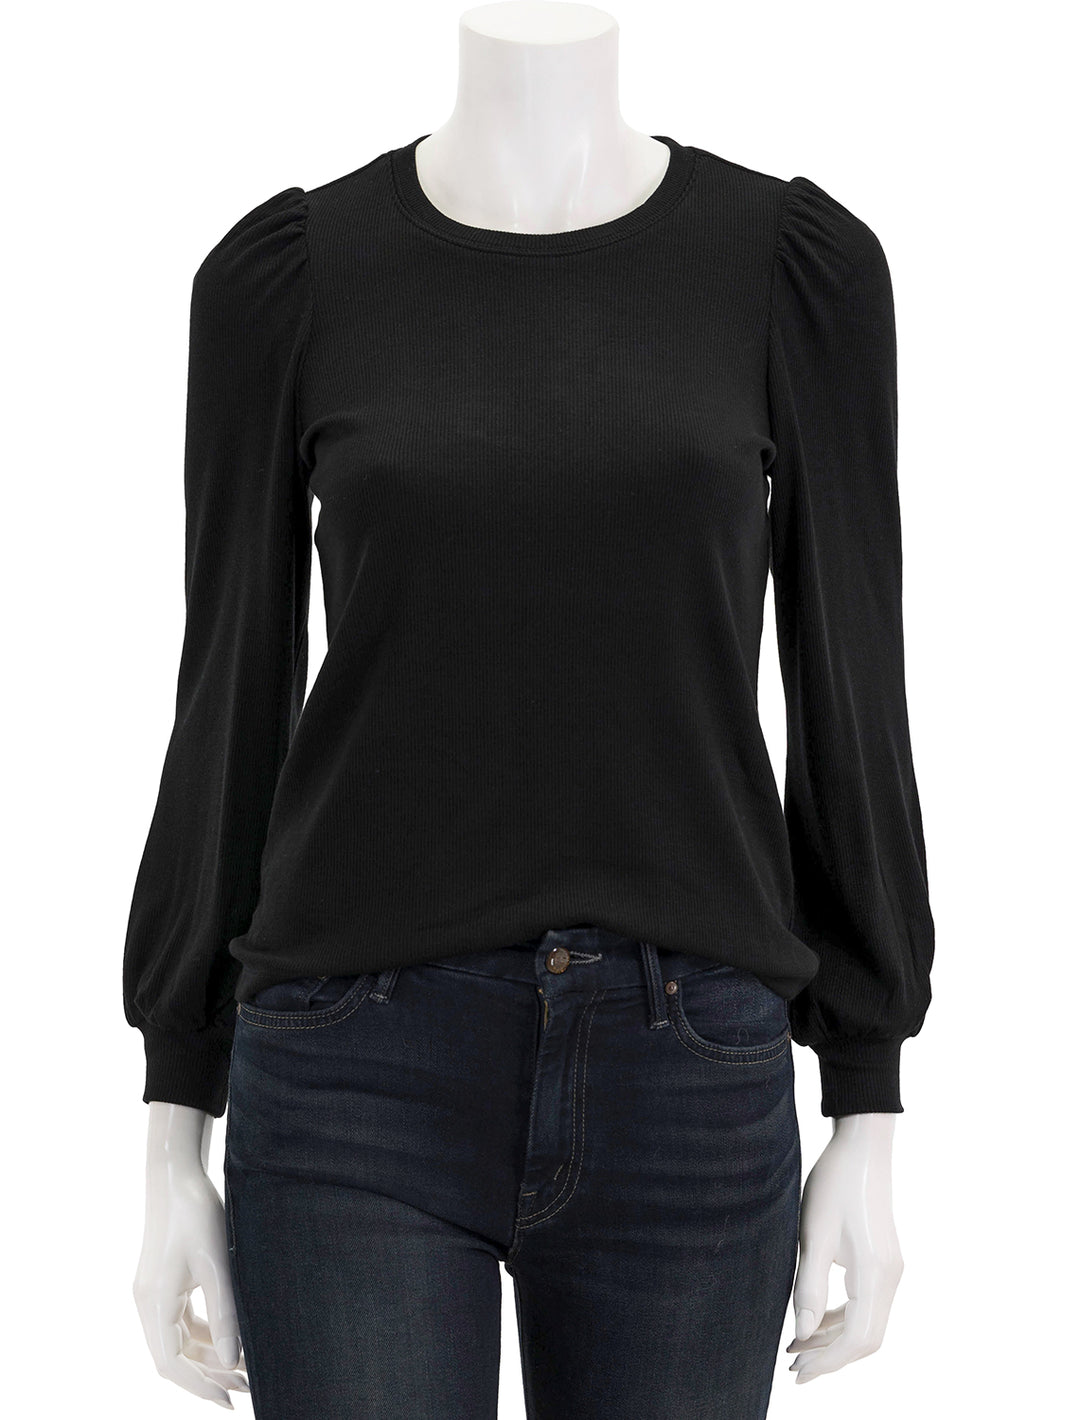 Front view of marine layer's lexi puff sleeve top in black.